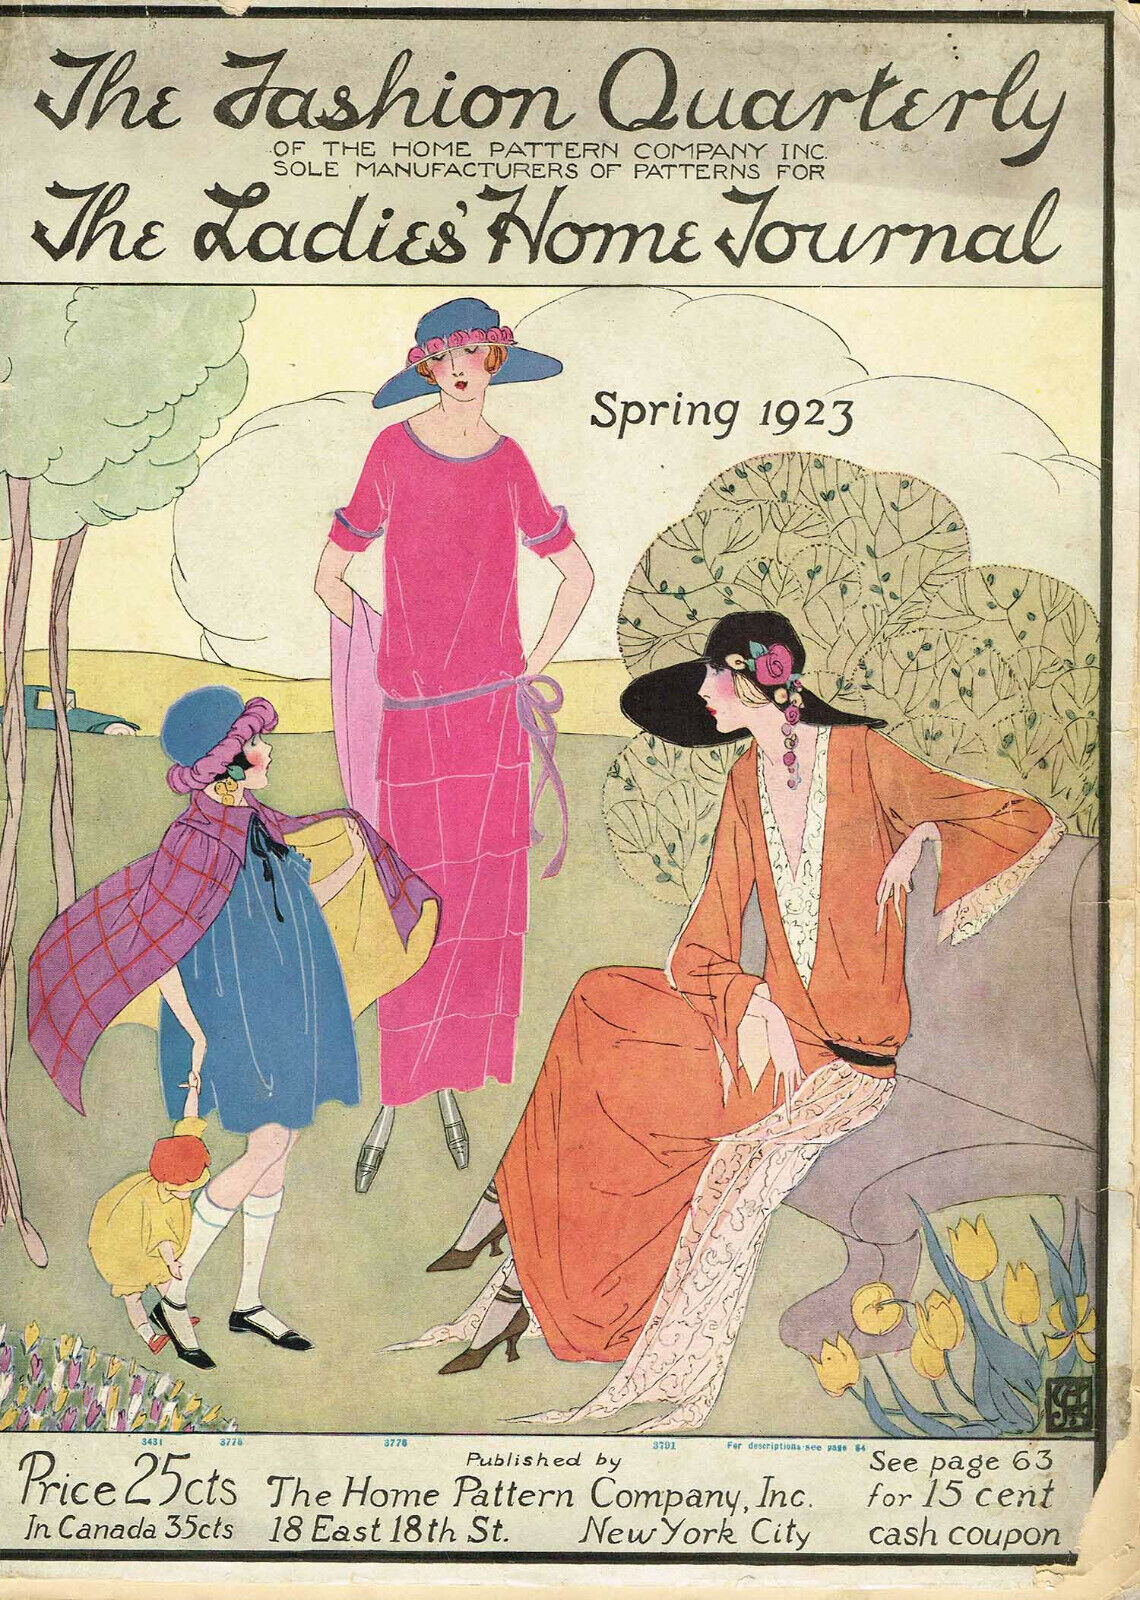 1920s Ladies Home Journal New Fashion Book 1923 Pattern Catalog Ebook Copy on CD